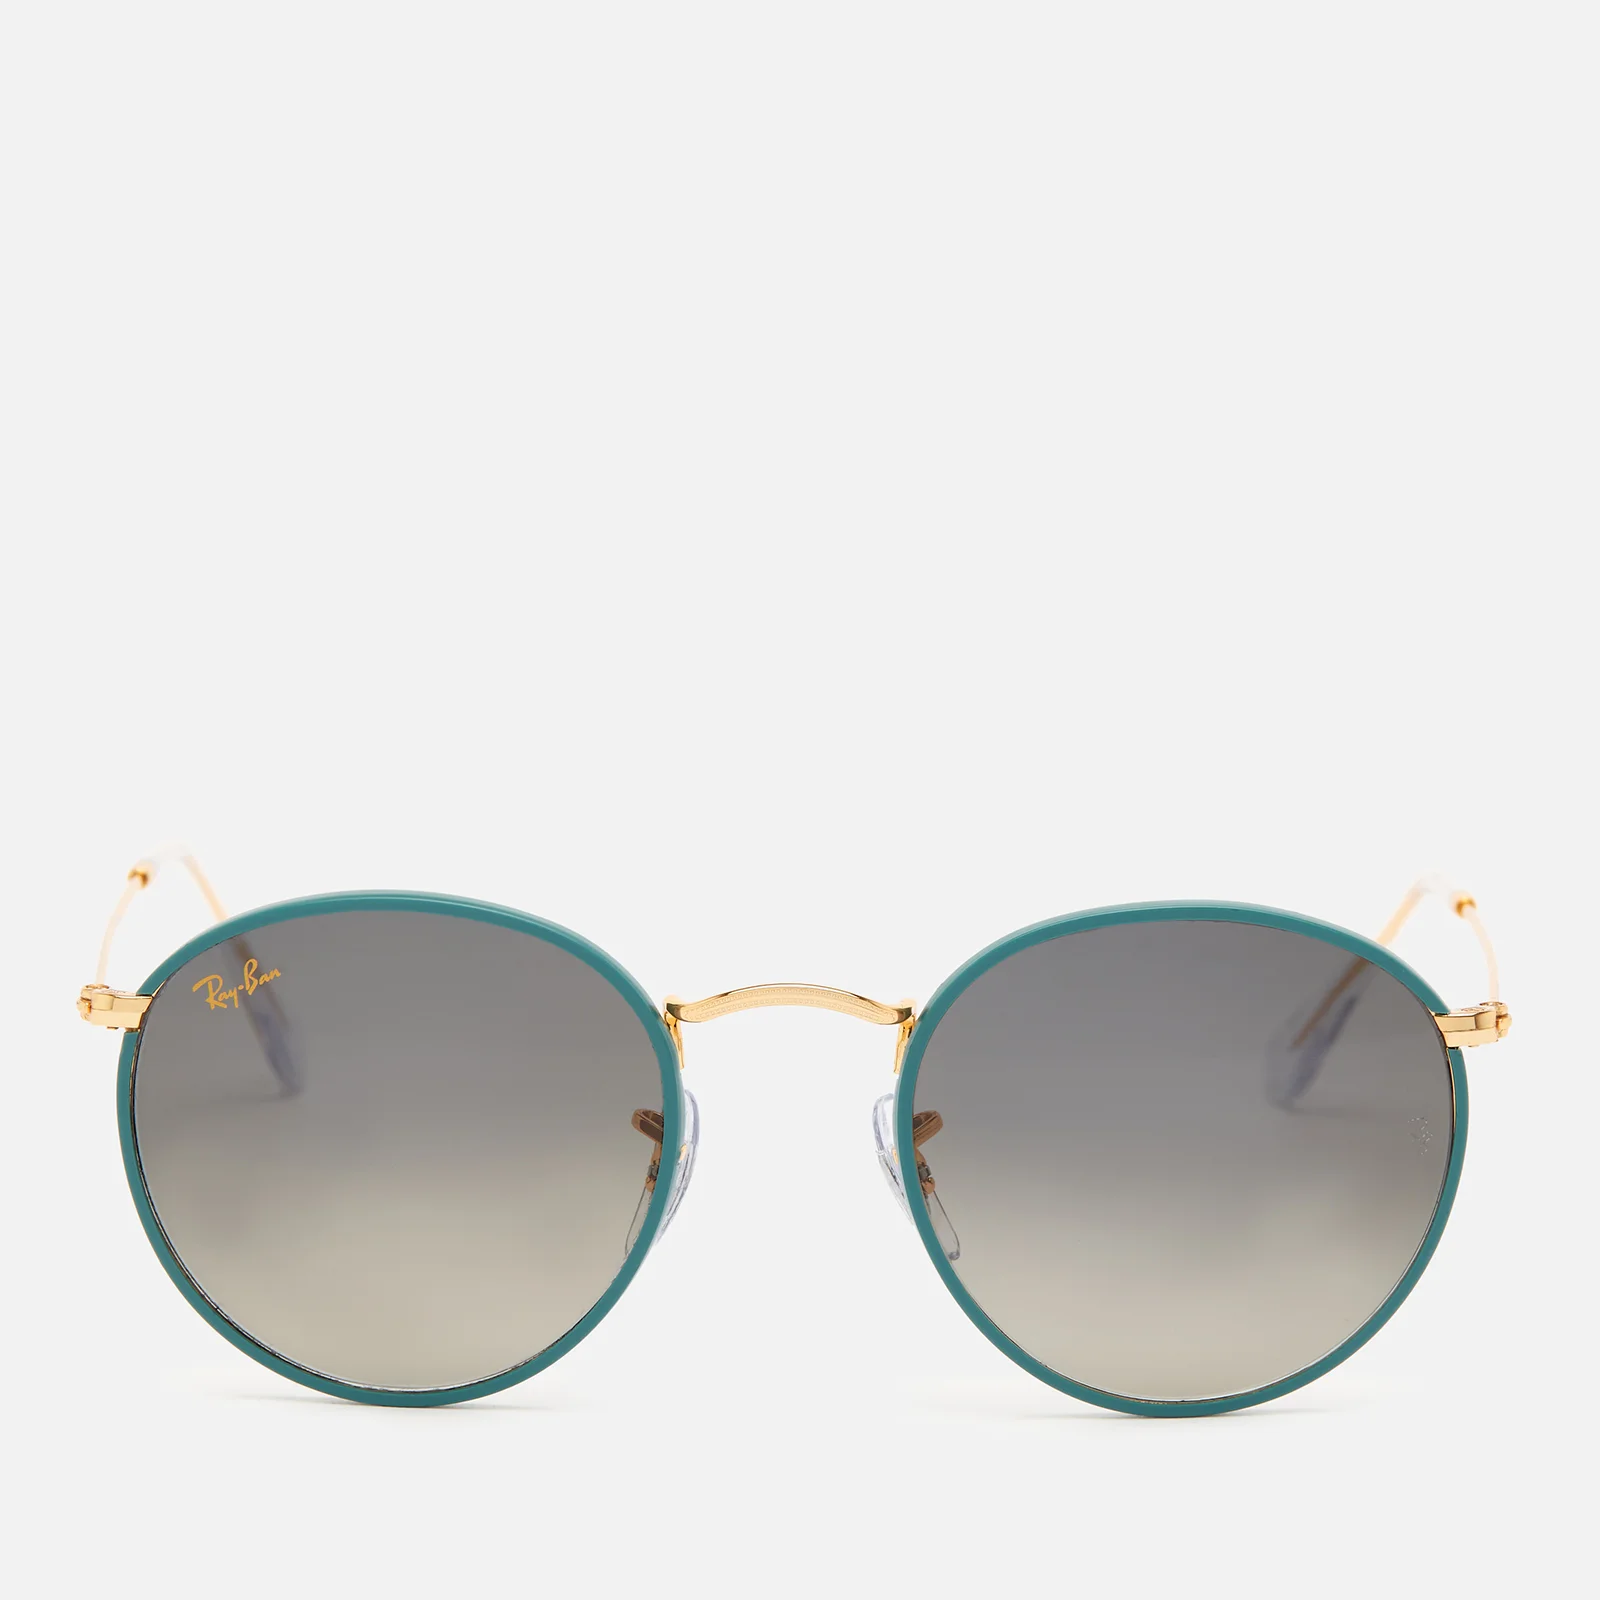 Ray-Ban Women's Round Metal Sunglasses - Gold/Blue Image 1